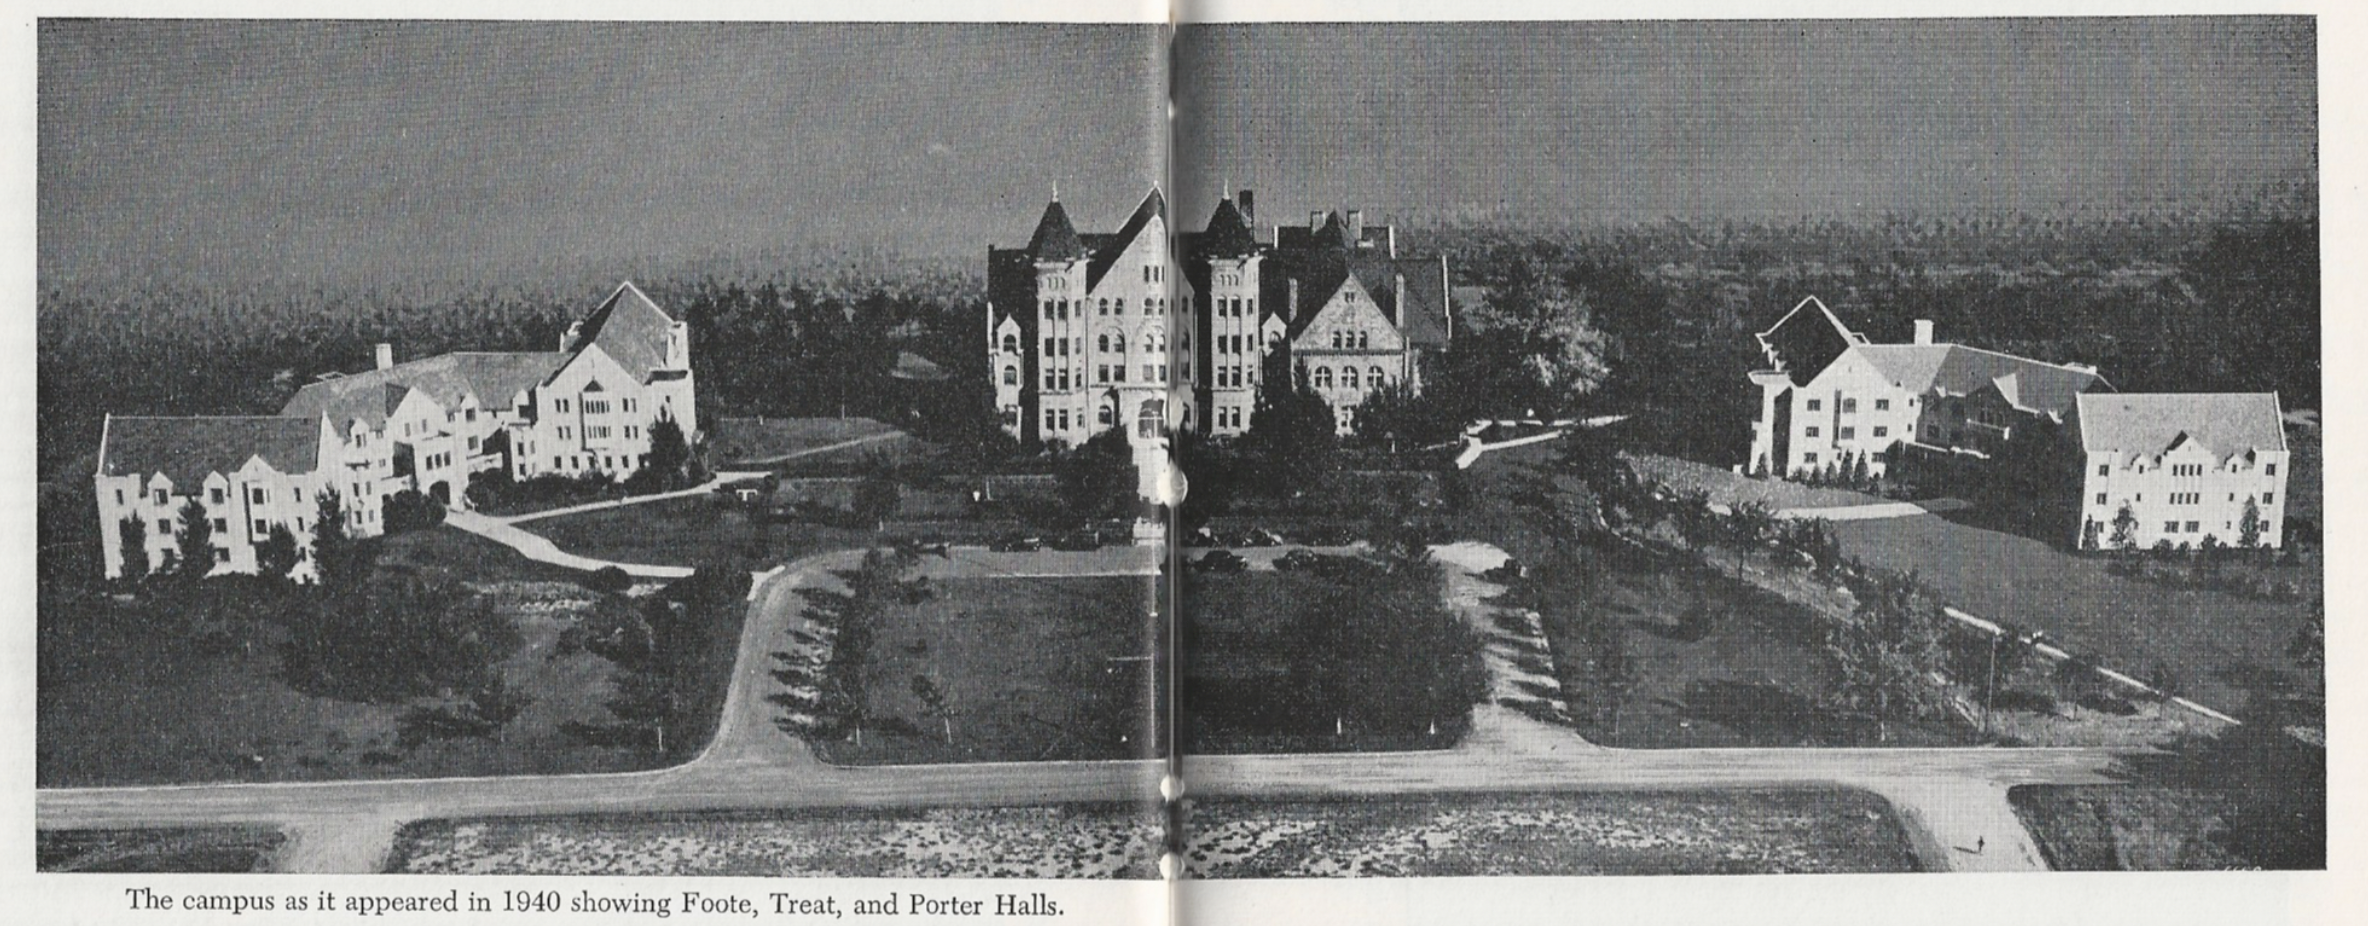 An aerial view of the campus in 1940, showing Foote, Treat, and Porter Halls